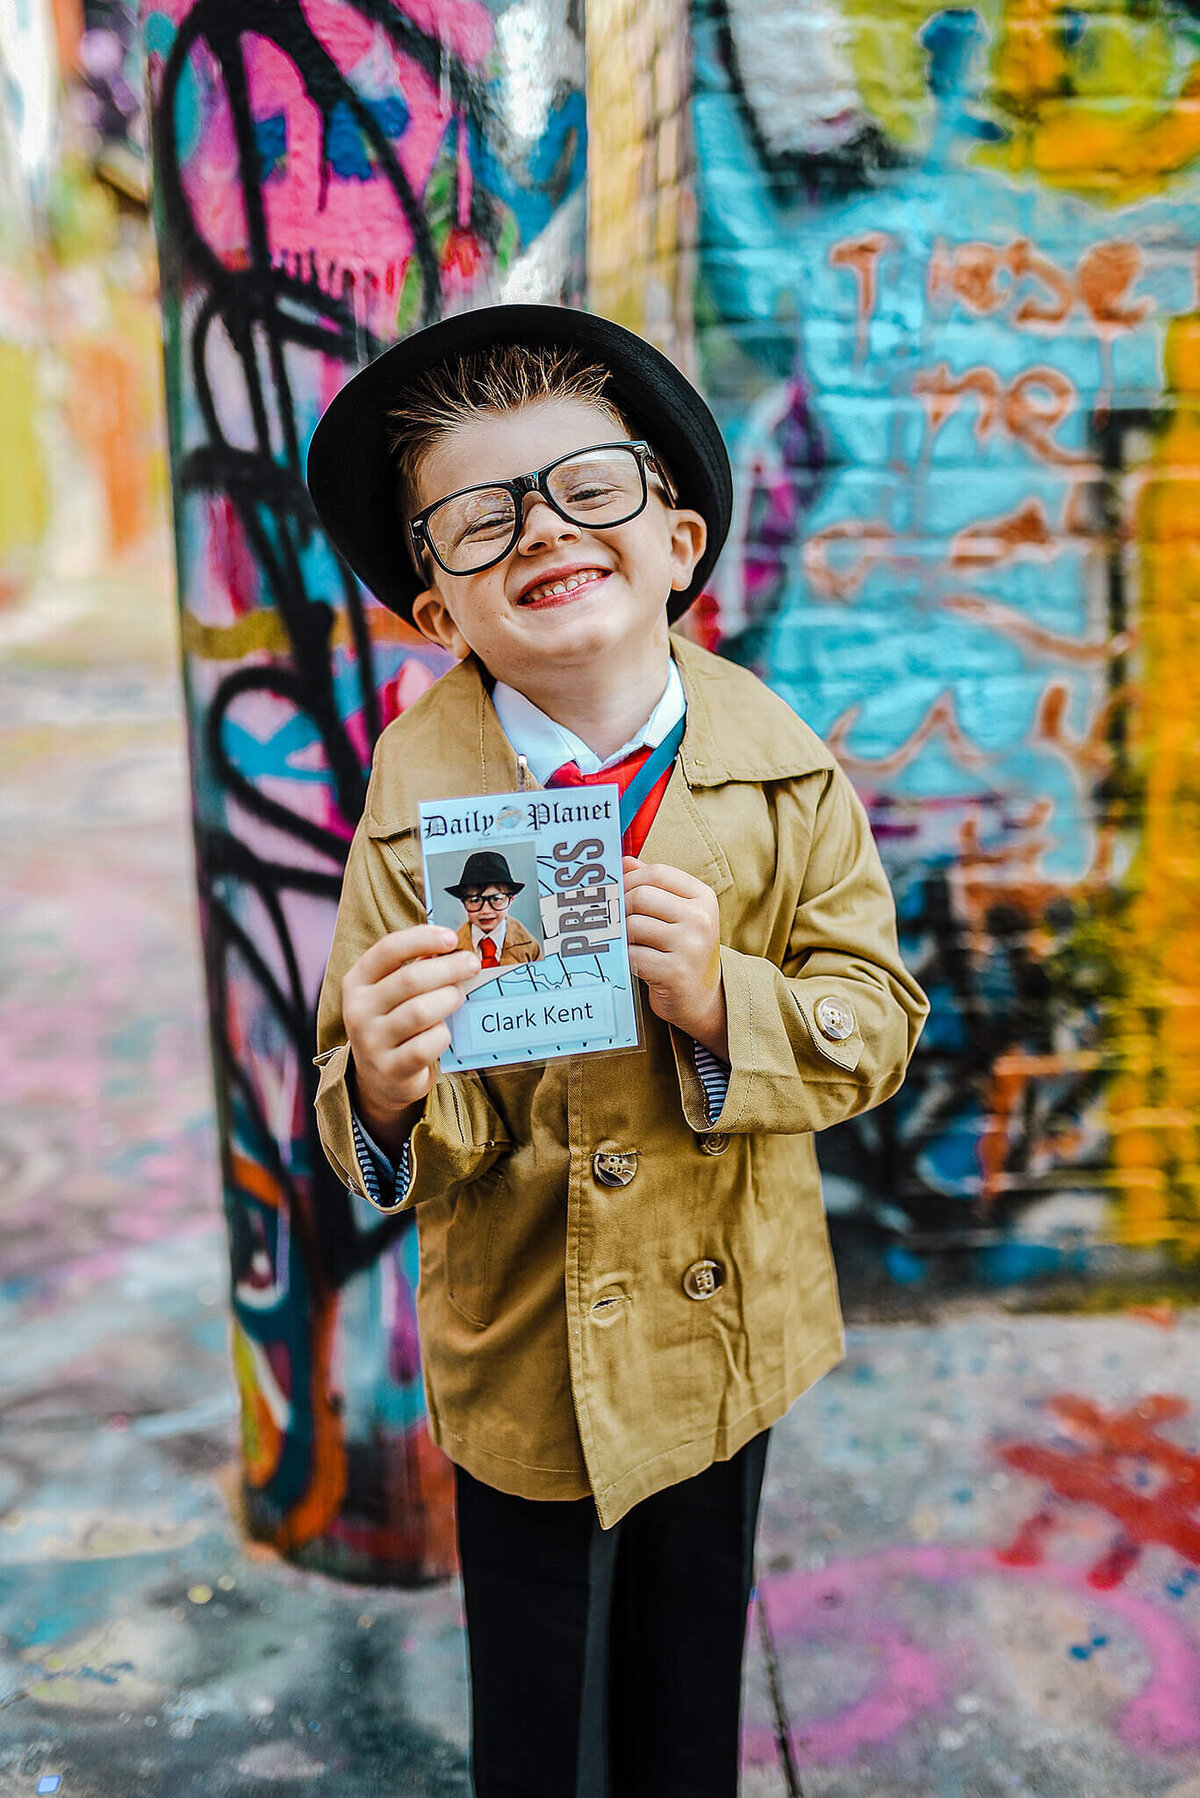 Little Boy wearing a black fedora and trench coat holding a Clark Kent press badge in graffiti alley Baltimore Maryland near MICA